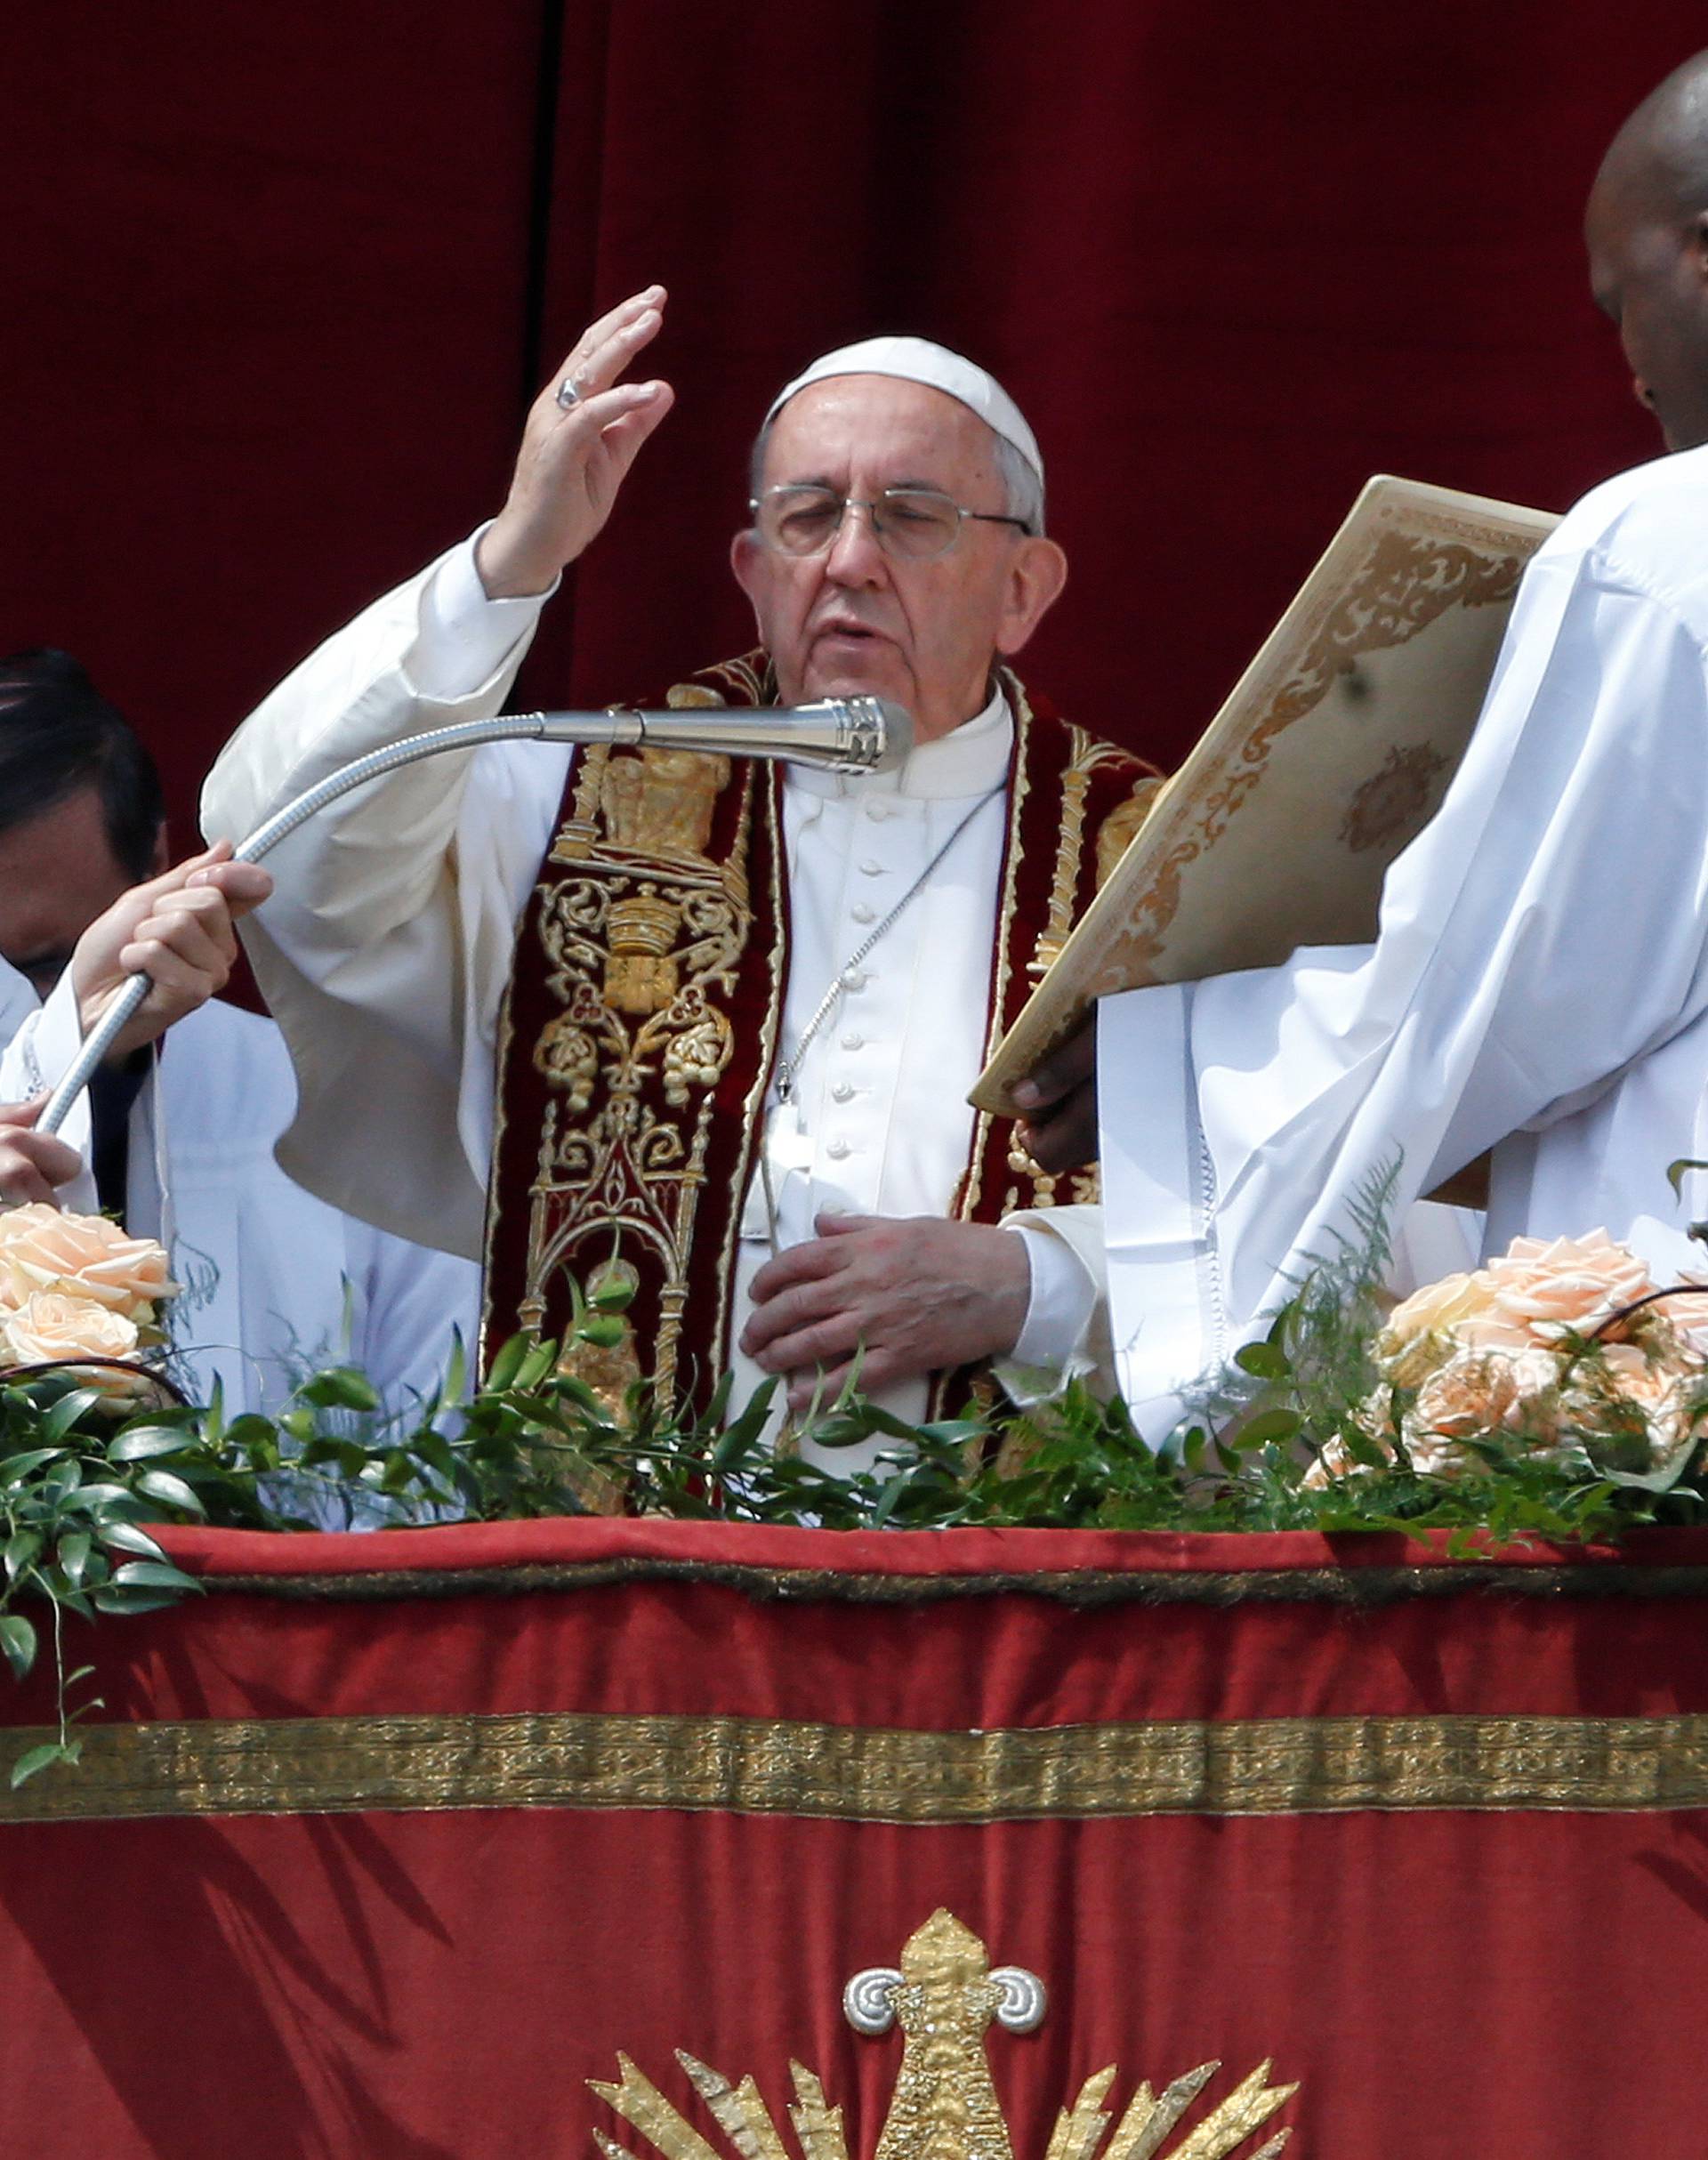 Pope Francis blesses the faithful during his "Urbi et Orbi" (to the city and the world) message from the balcony overlooking St. Peter's Square at the Vatican